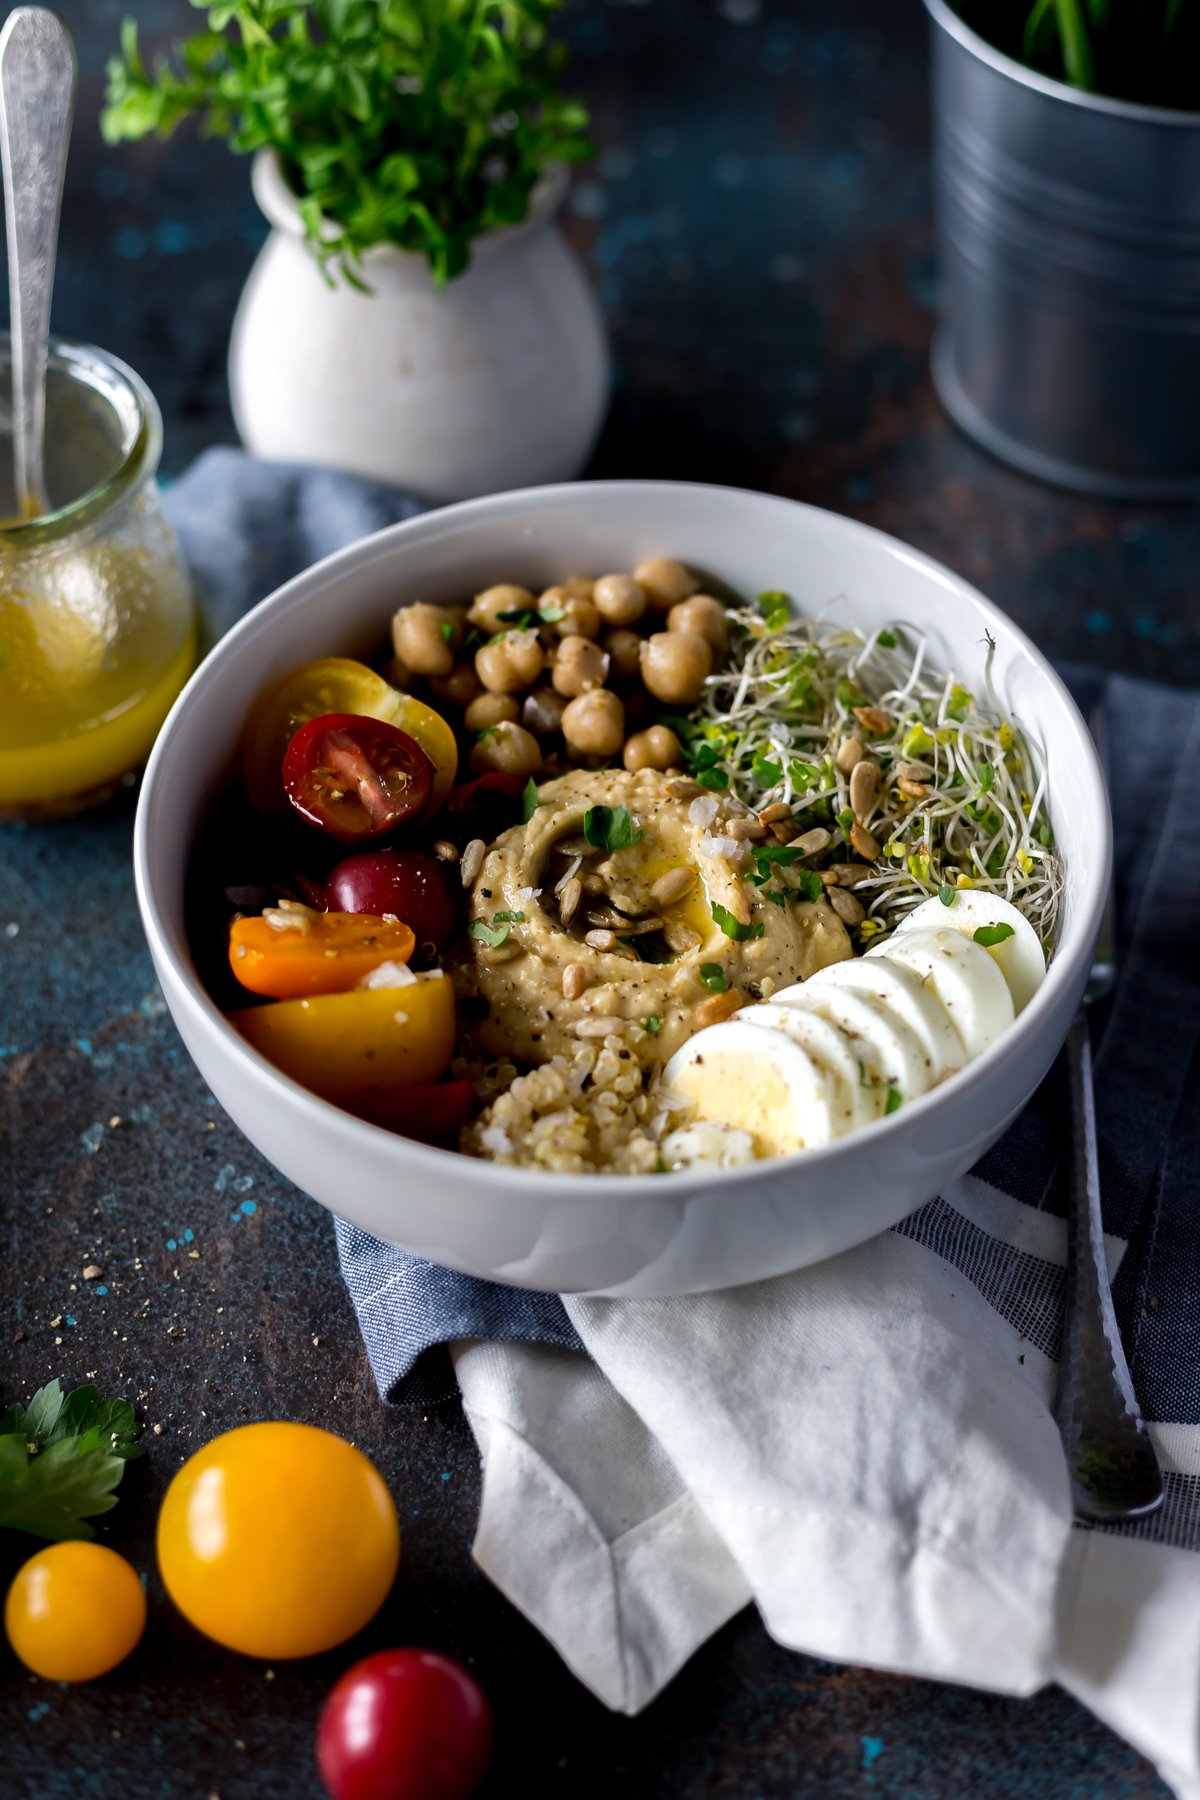 Enjoy a hummus recipe easy enough to whip together in minutes! This flavorful quinoa hummus protein power bowl will leave you satisfied; breakfast, lunch, or dinner! | asimplepantry.com